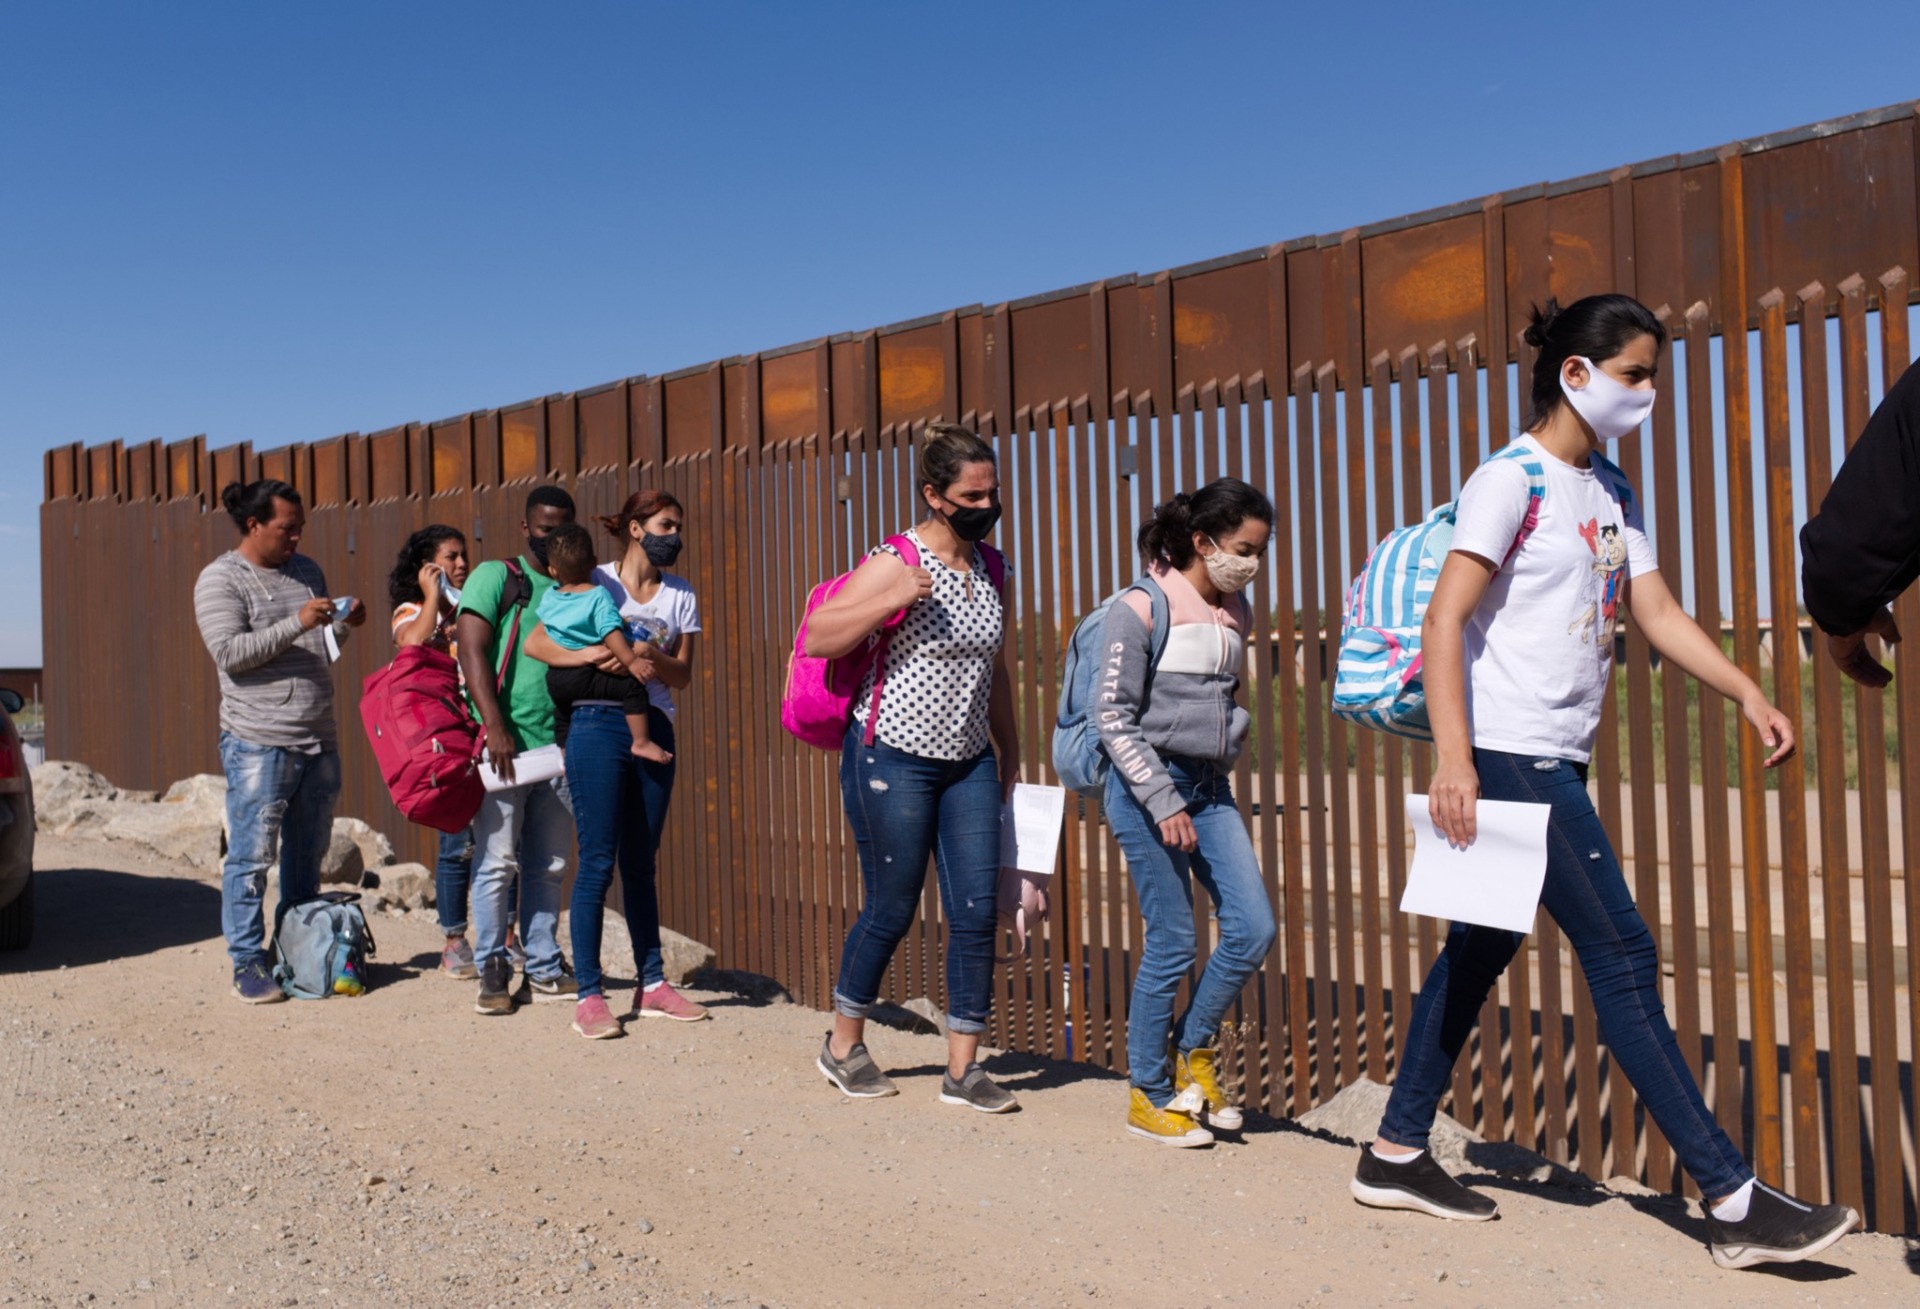 In this Tuesday, June 8, 2021, photo, a group of Brazilian migrants walk around a gap in the U.S.-Mexico border in Yuma, Ariz., seeking asylum in the United States after crossing over from Mexico. The Biden administration says it has identified more than 3,900 children separated from their parents at the U.S.-Mexico border under former President Donald Trump's "zero-tolerance" policy on illegal crossings. (AP Photo/Eugene Garcia)